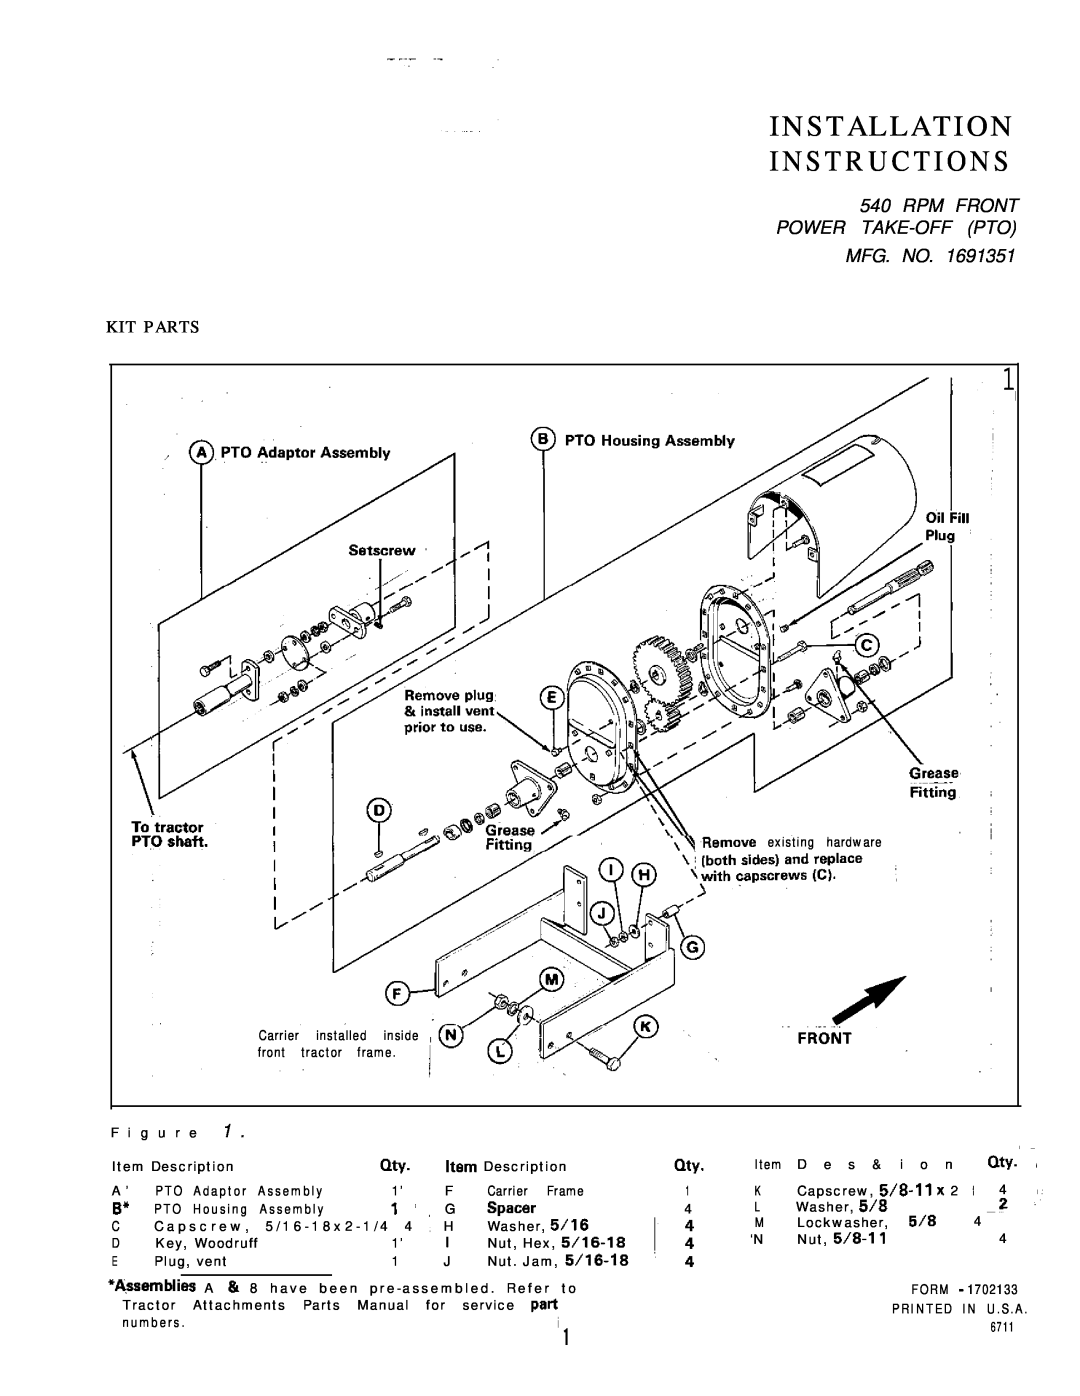 Snapper 1691351 installation instructions Installation Instructions, Rpm Front Power Take-Offpto Mfg. No, Kit Parts 